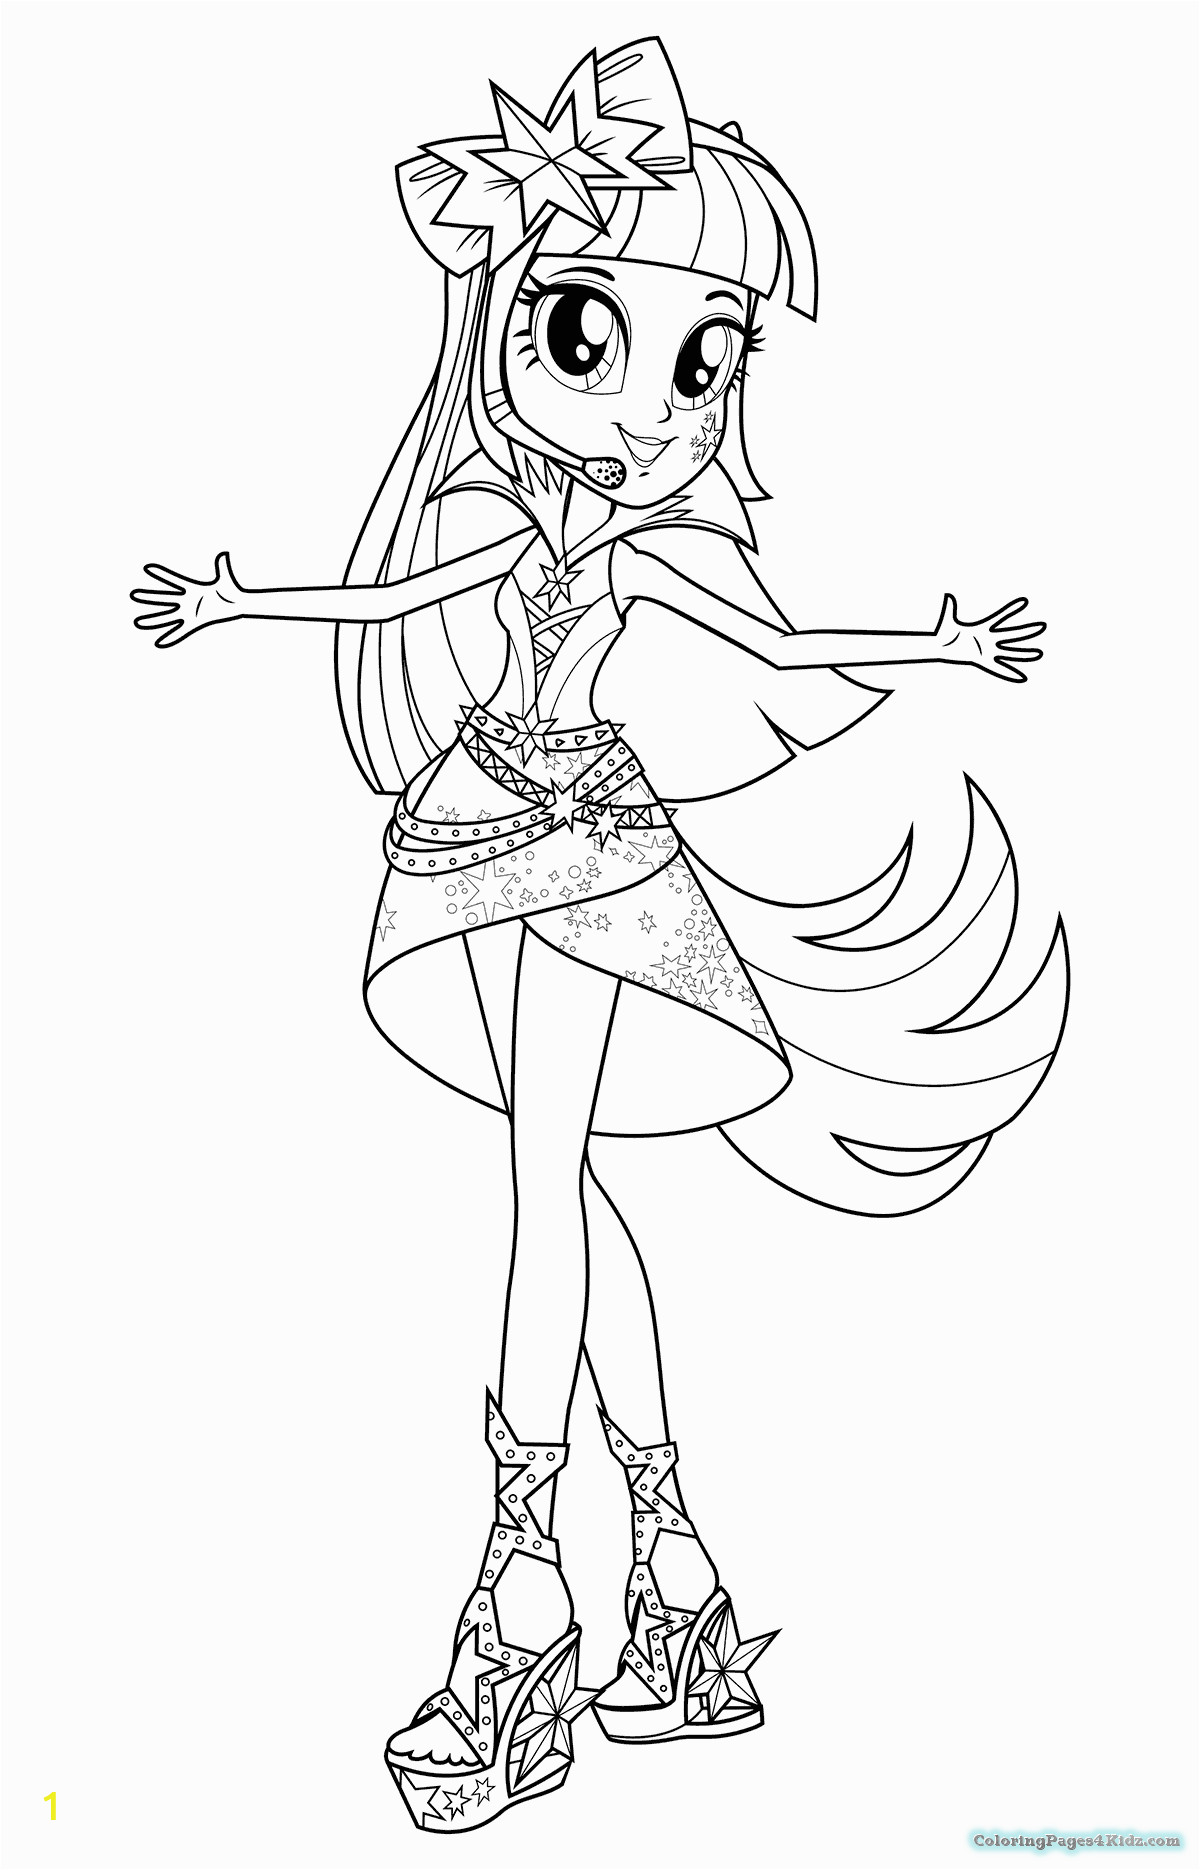 My Little Pony Equestria Coloring Pages My Little Pony Equestria Girls Rainbow Rocks Coloring